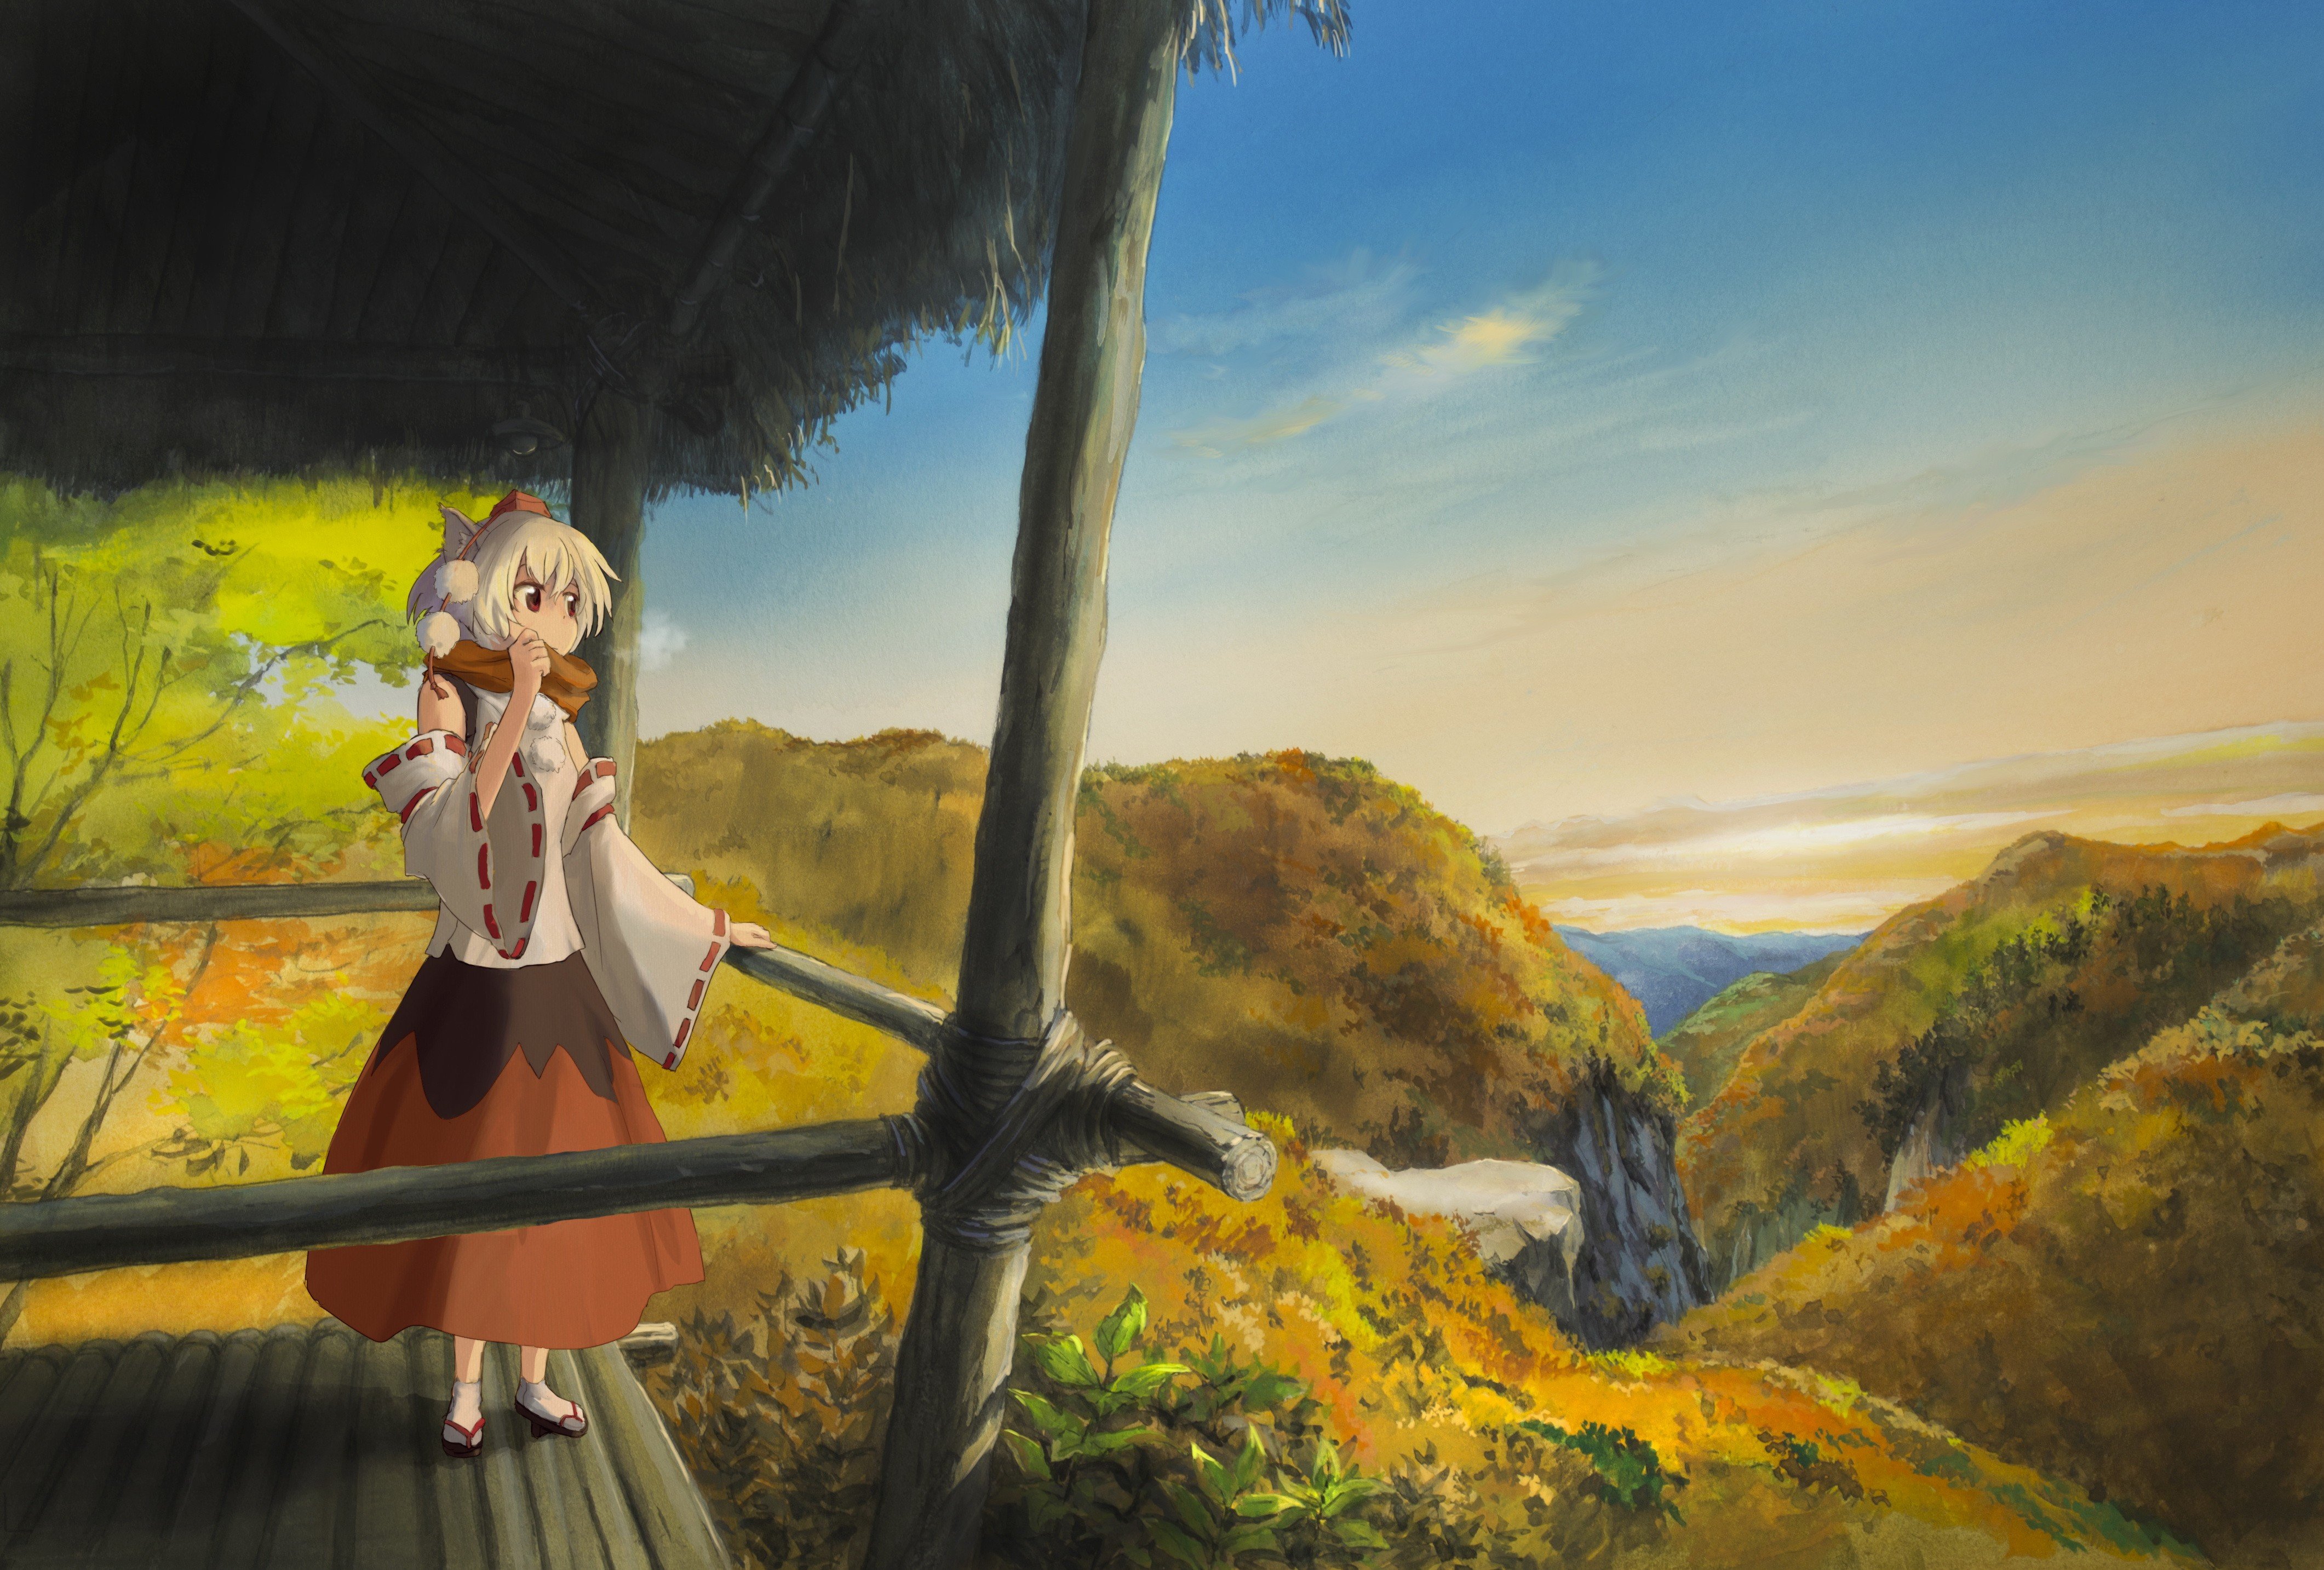 video, Games, Landscapes, Nature, Touhou, Skirts, Socks, Animal, Ears, Red, Eyes, Short, Hair, Sandals, Scarfs, White, Hair, Inubashiri, Momiji, Skyscapes, Hats, Japanese, Clothes, Inumimi, Tengu, Detached, Slee Wallpaper